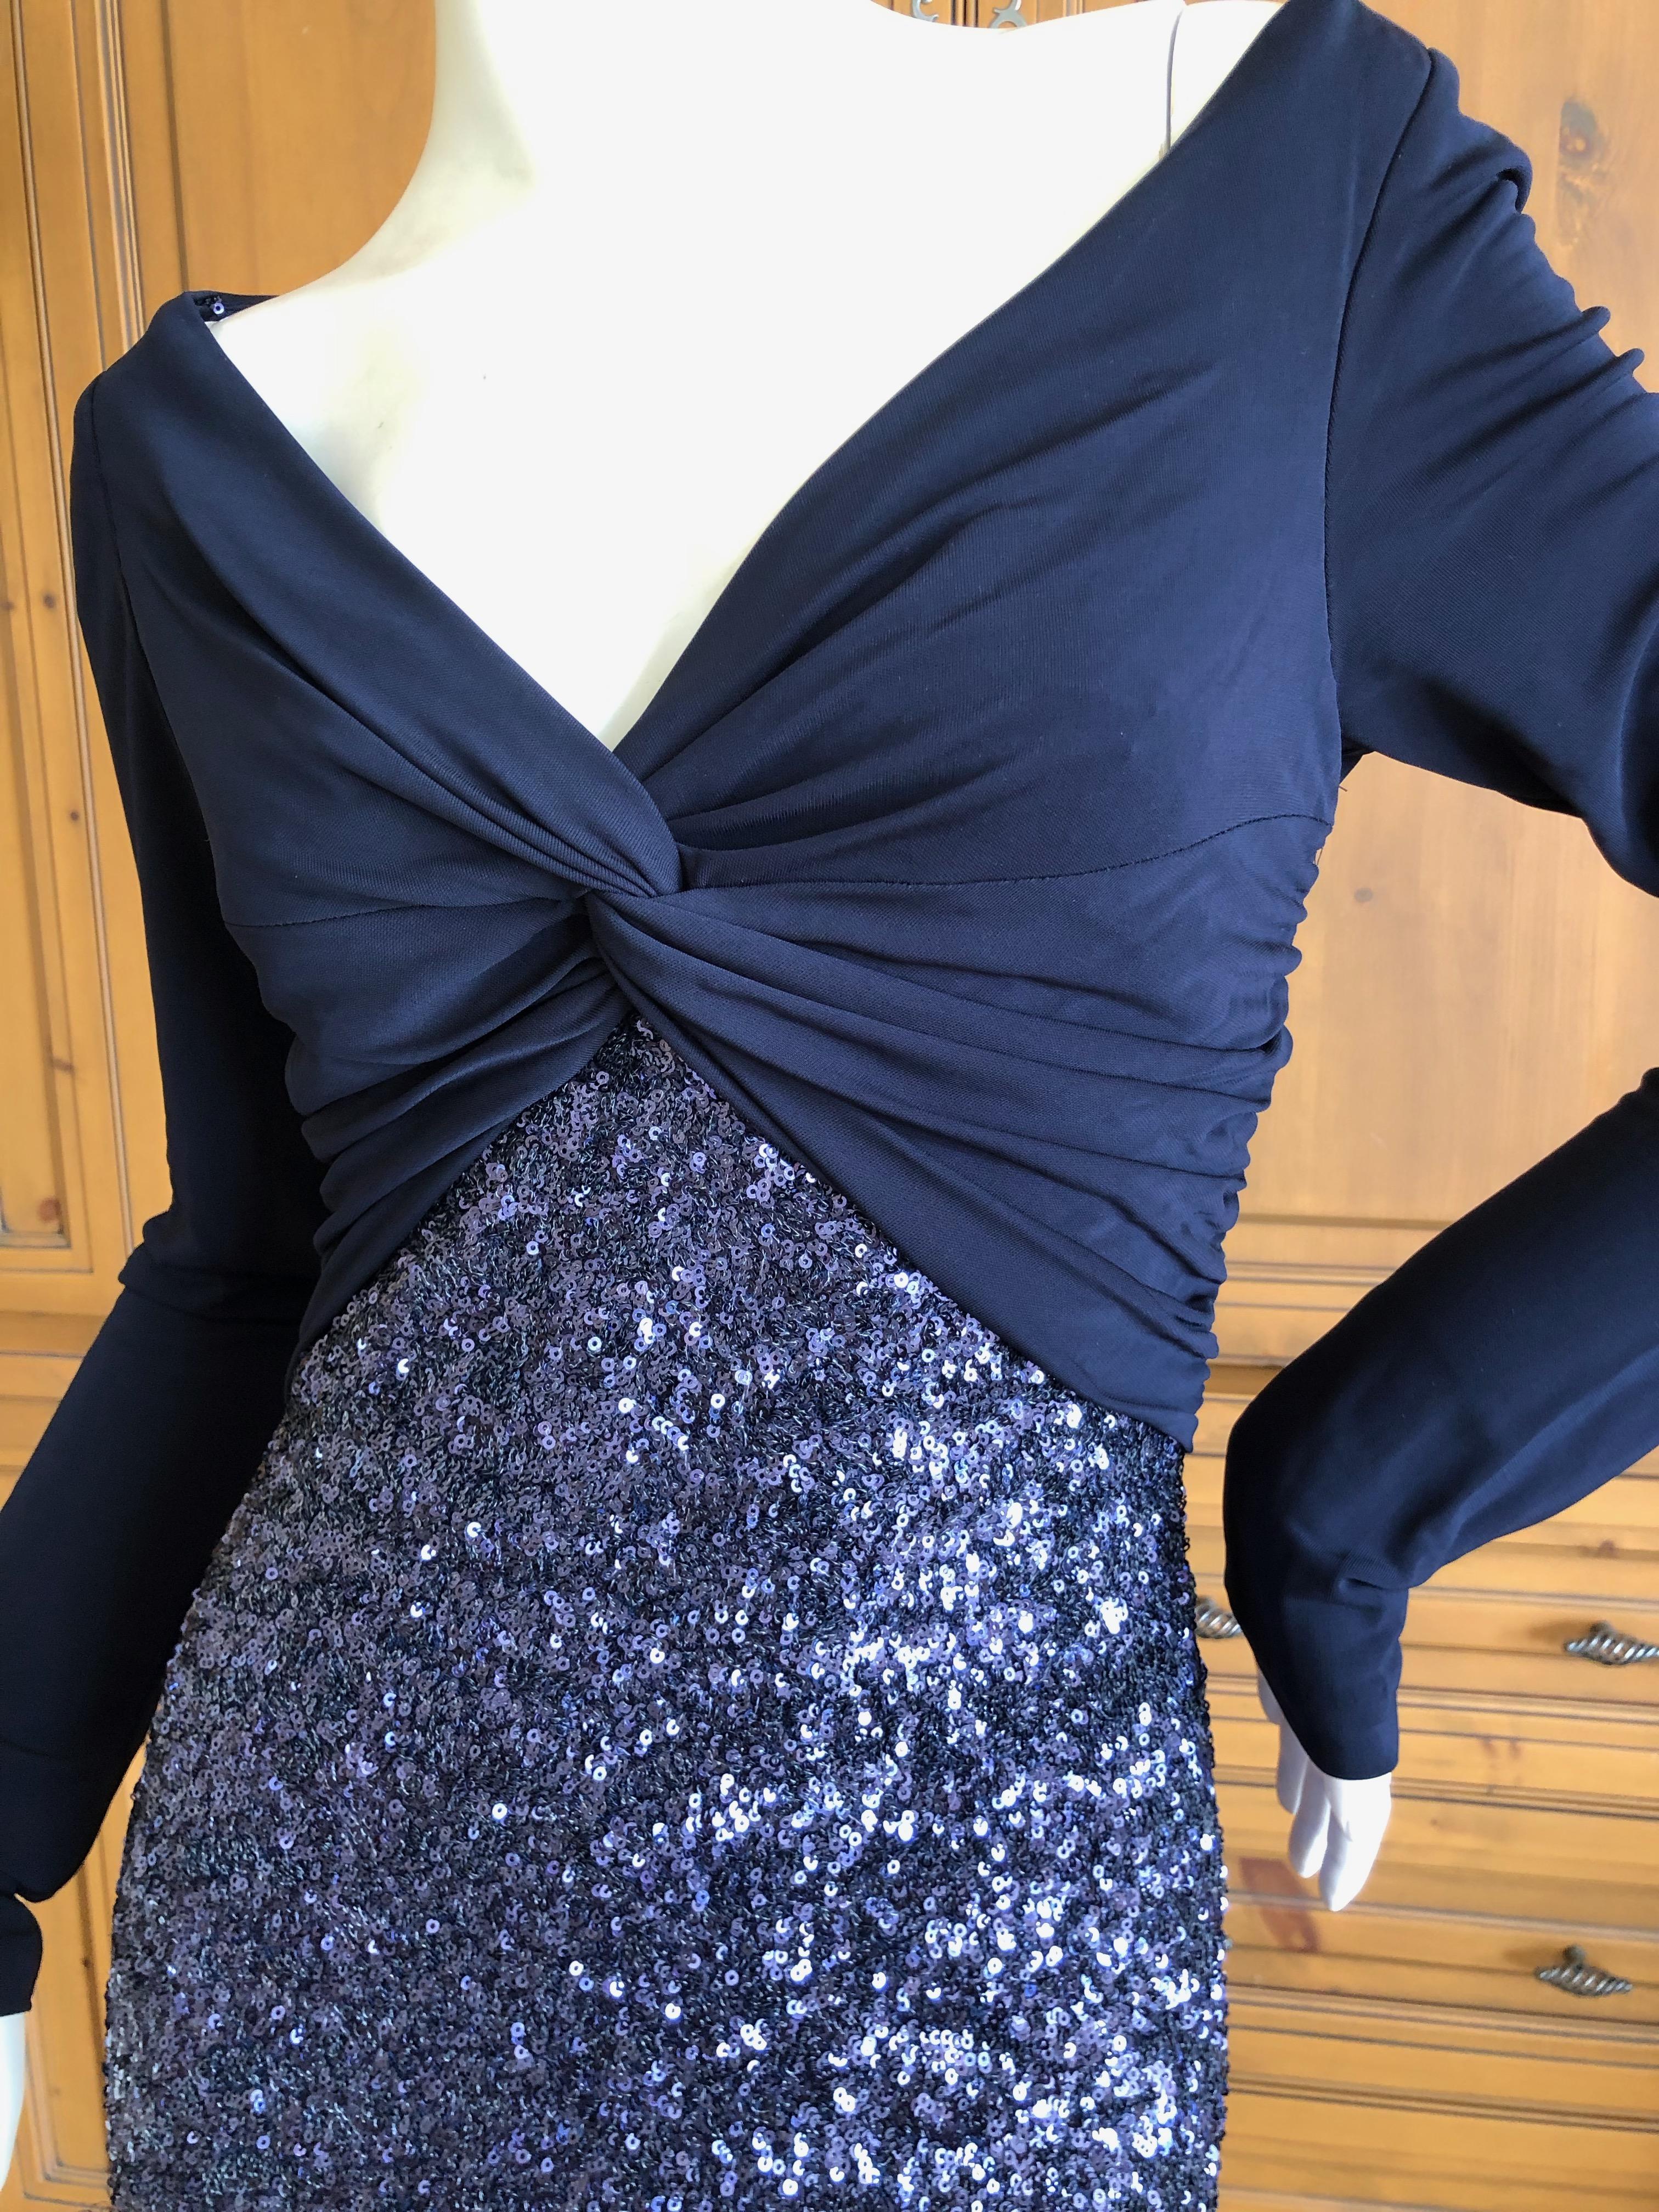 Dolce & Gabbana D&G Navy Blue Low Cut Silk Sequin Evening Gown w Keyhole Back 42 In Excellent Condition For Sale In Cloverdale, CA